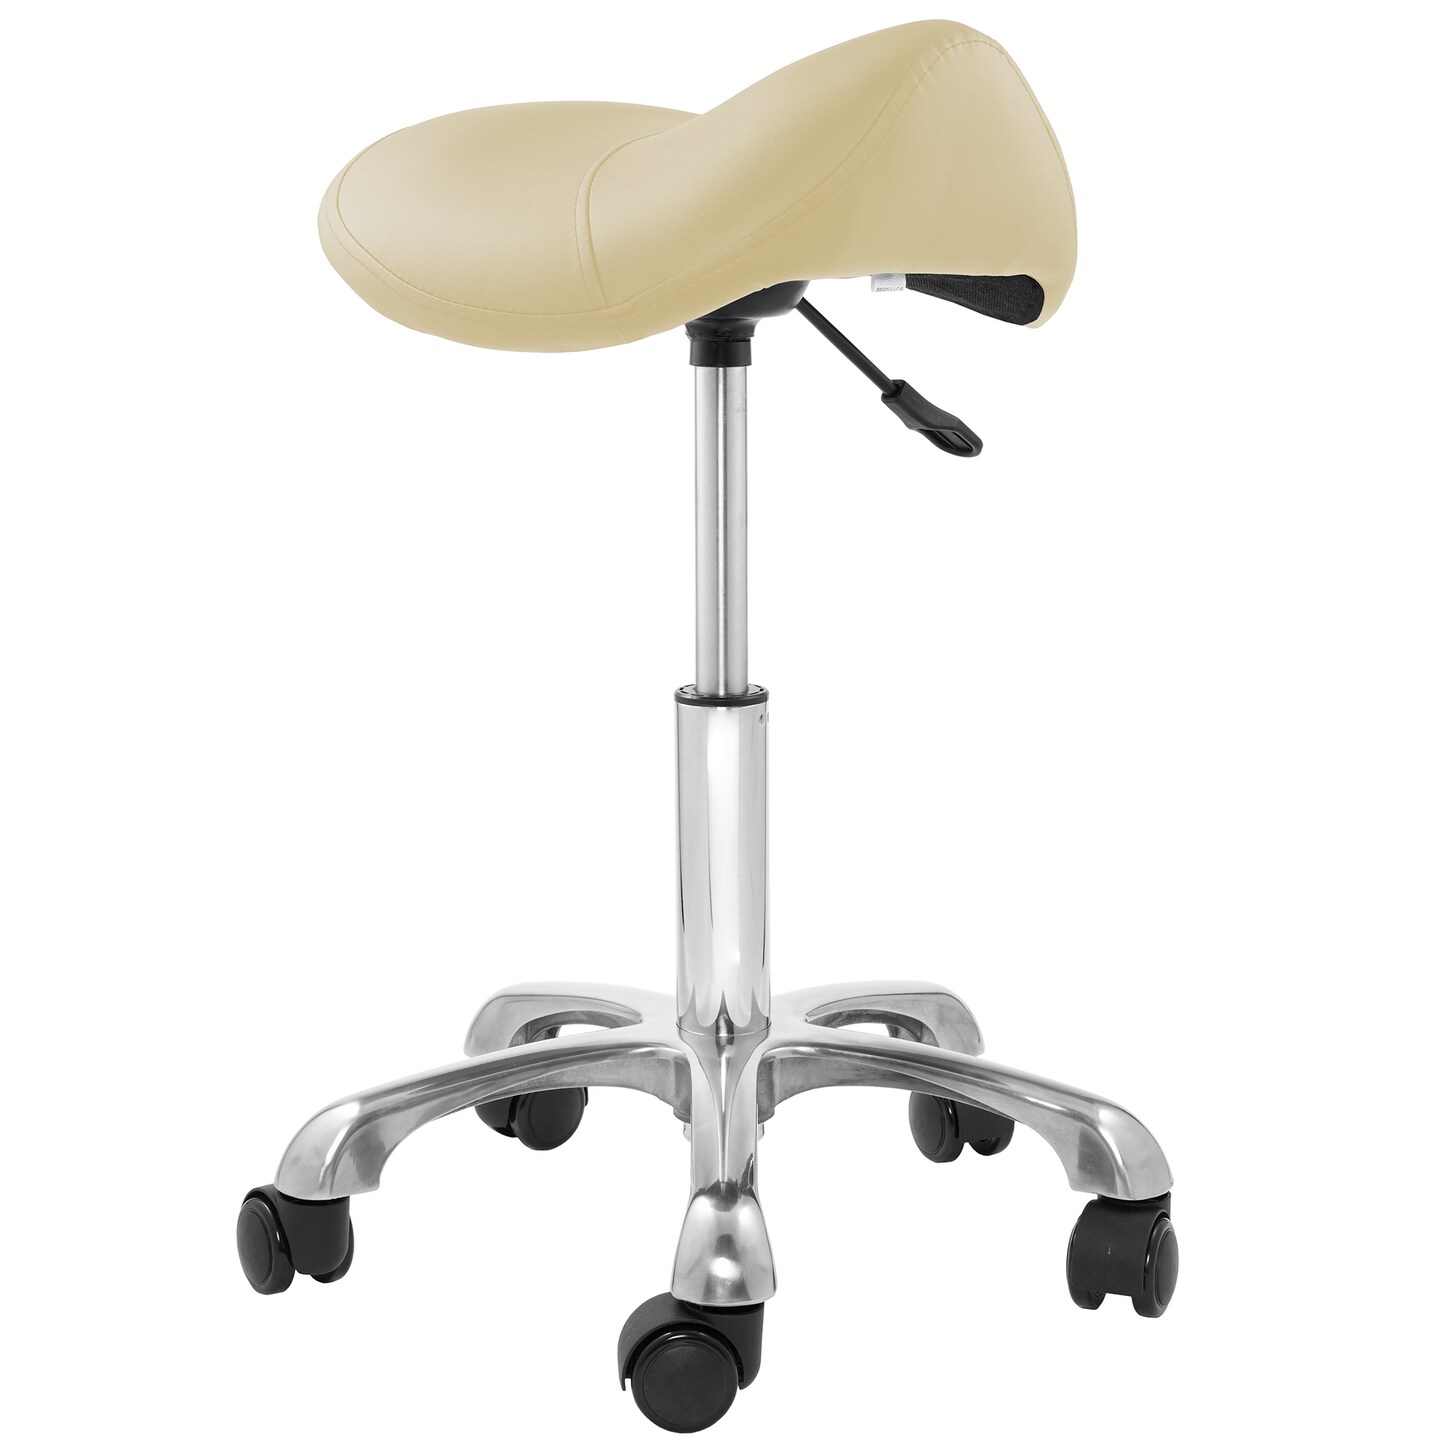 Saloniture Professional Ergonomic Saddle Stool - Adjustable Hydraulic Seat, Rolling Spa Salon, Massage, and Medical Office Chair with Swivel Wheels